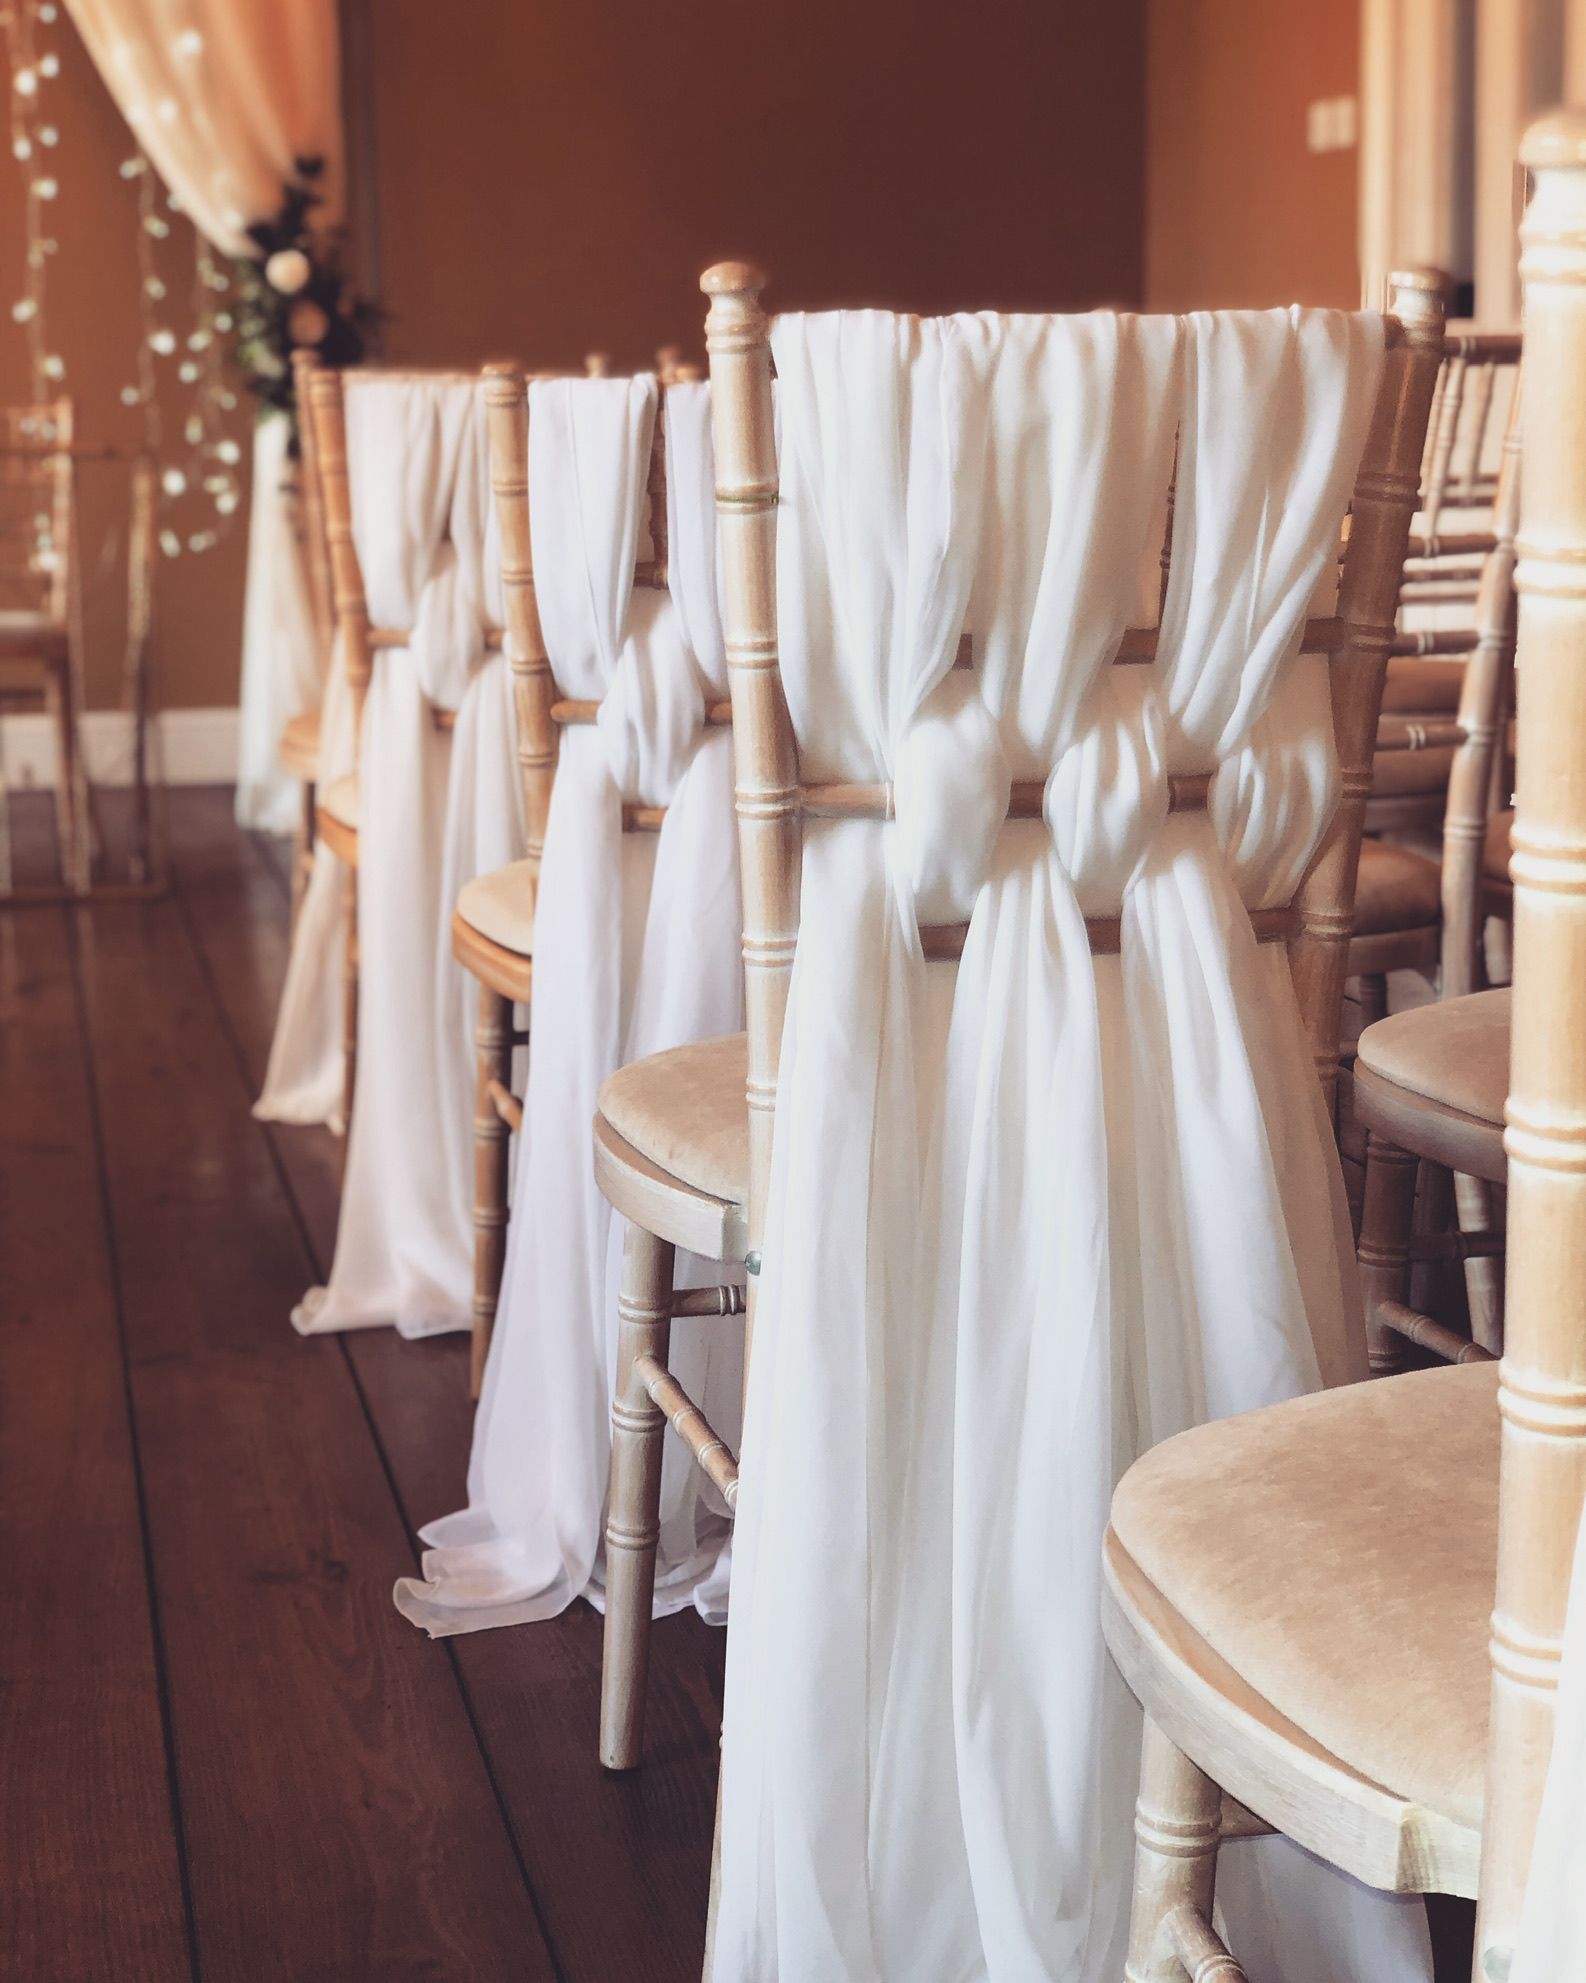 a row of chairs with white drapes on them.